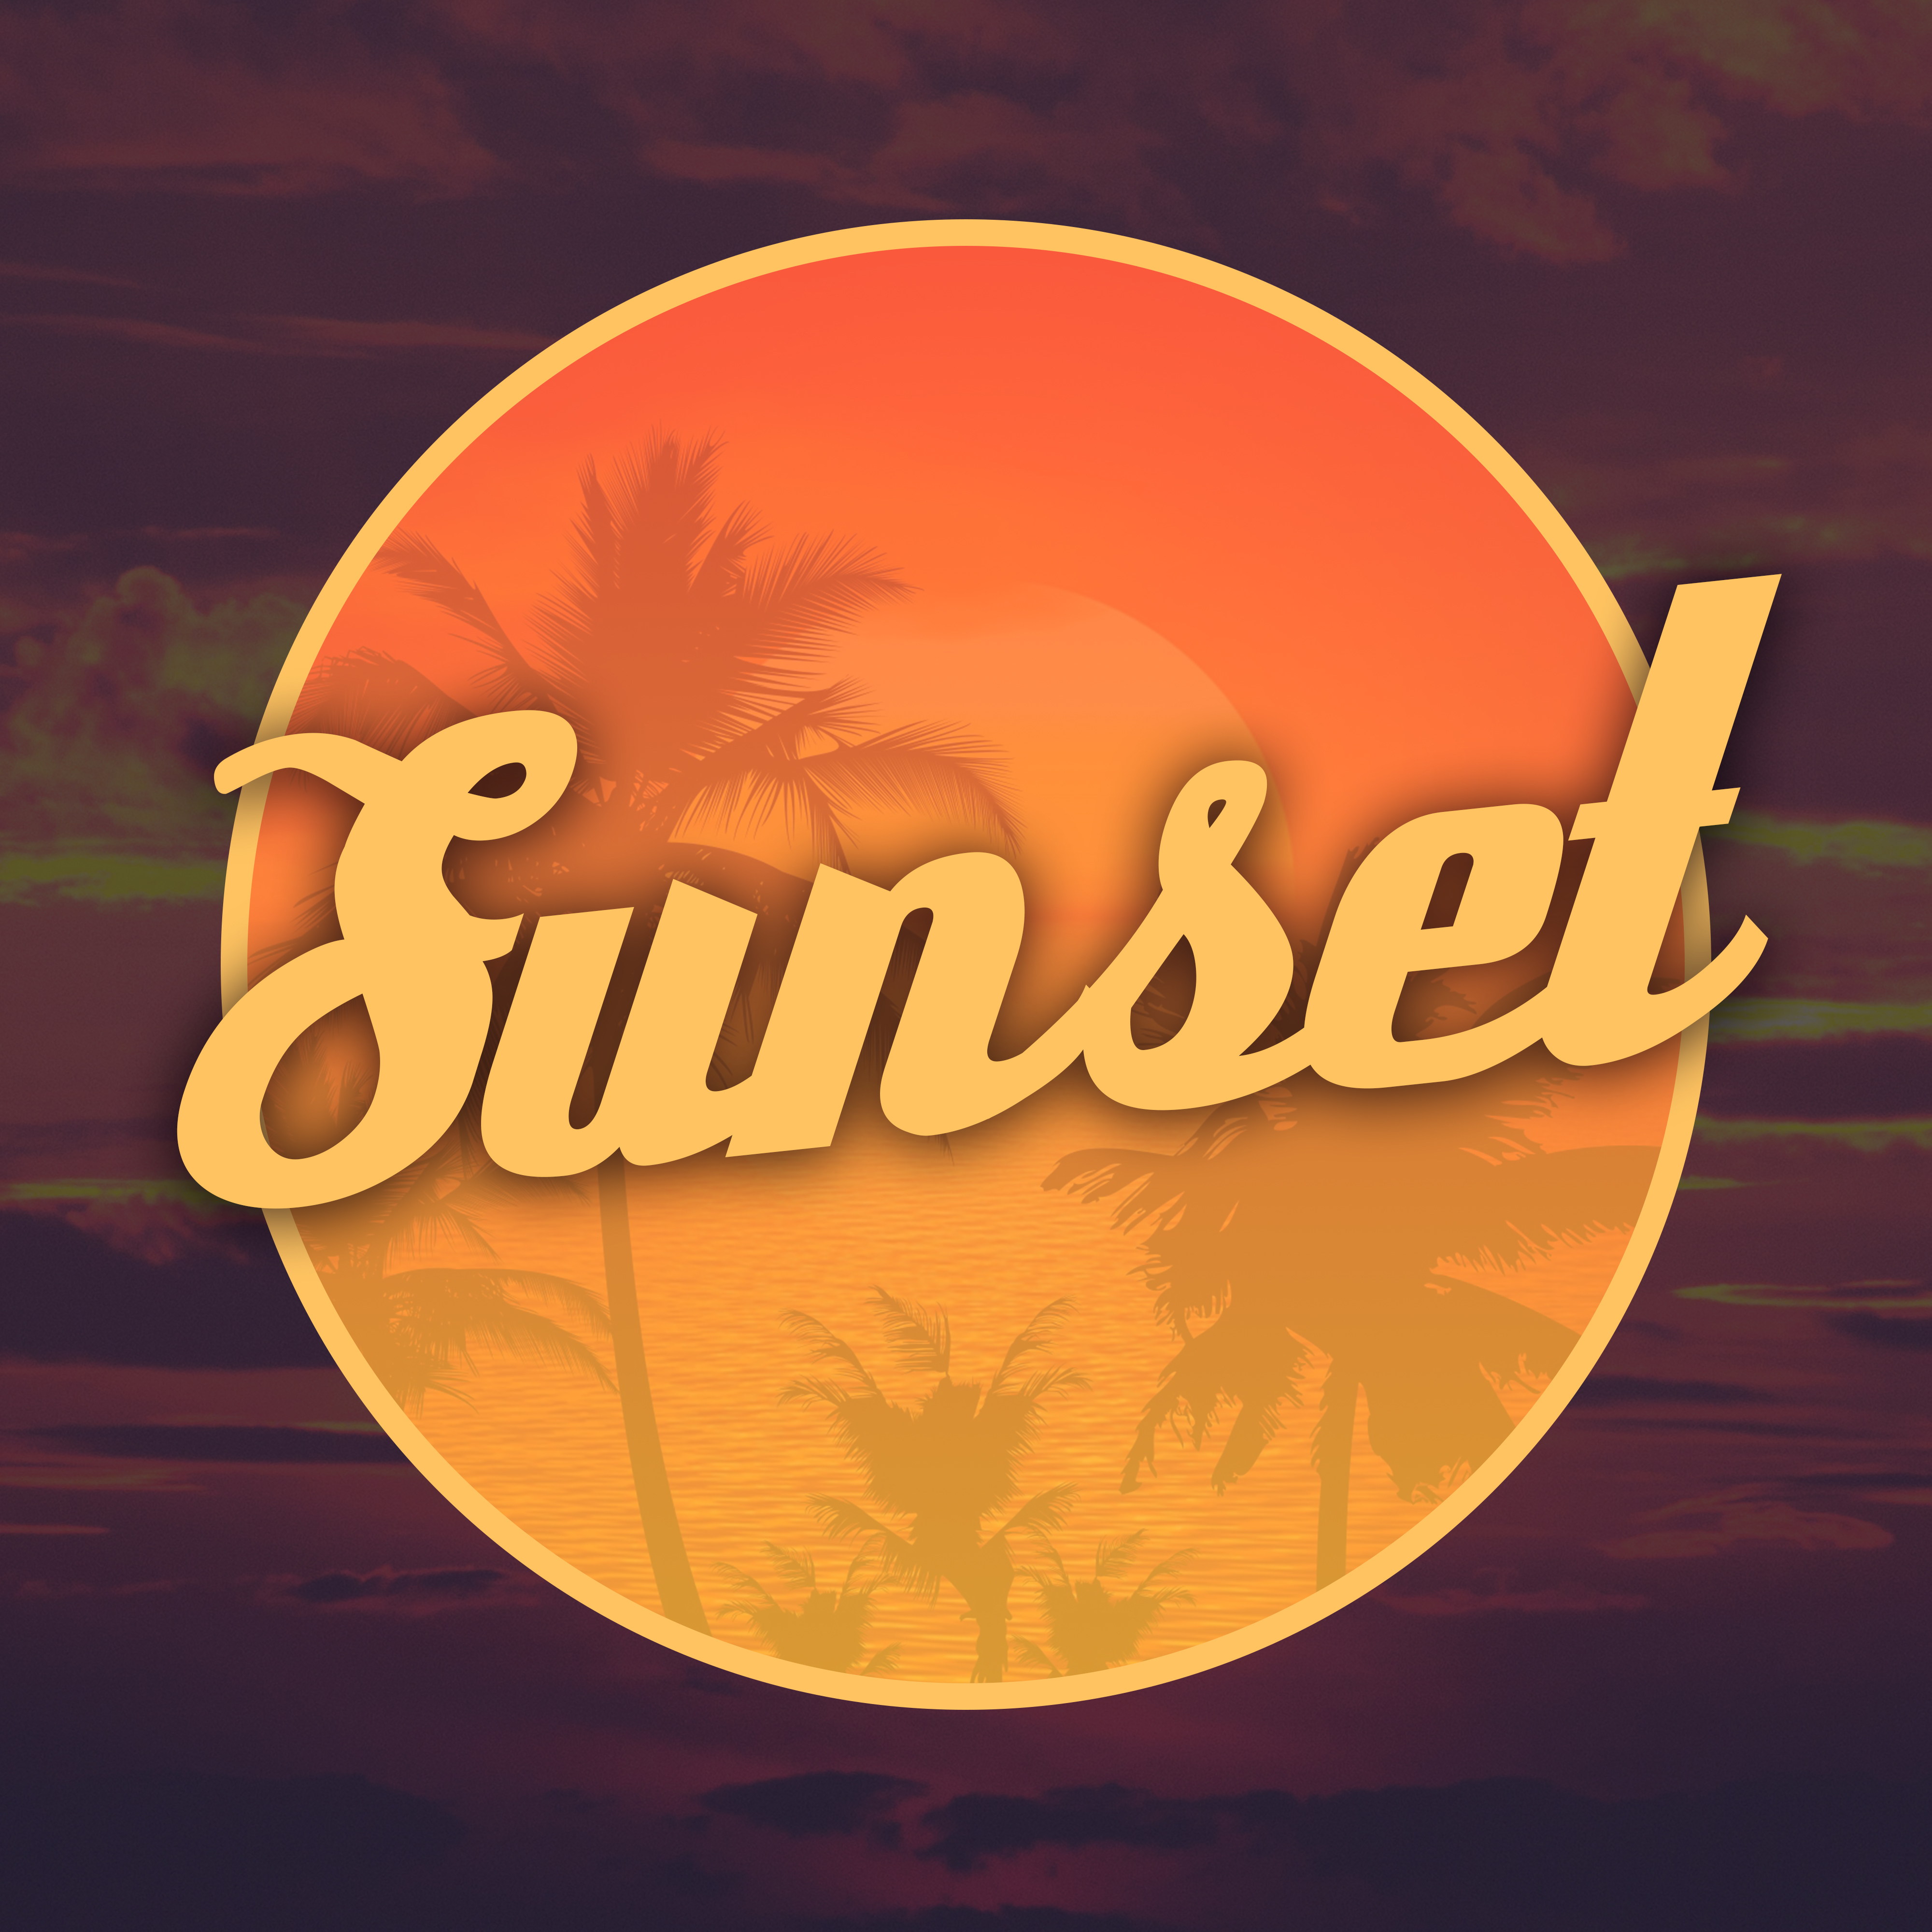 Sunset – 2017 Chill Out Music, Summer Hits, Relax, Balearic Islands, Tropical Chill